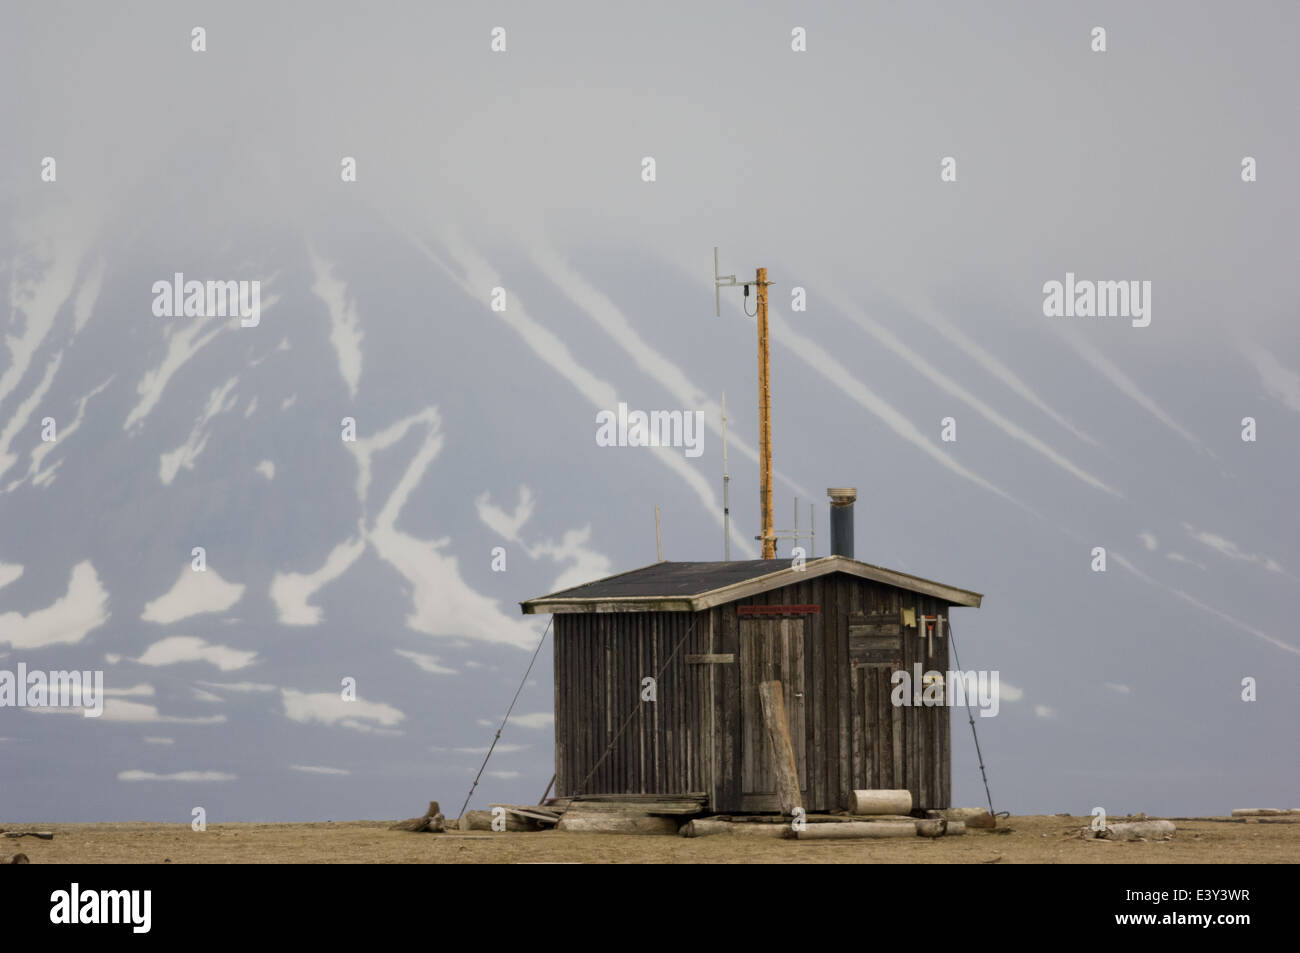 Research hut at the Walrus haulout at Prins Karls Forland, off Spitsbergen, Svalbard Archipelago, Norway Stock Photo